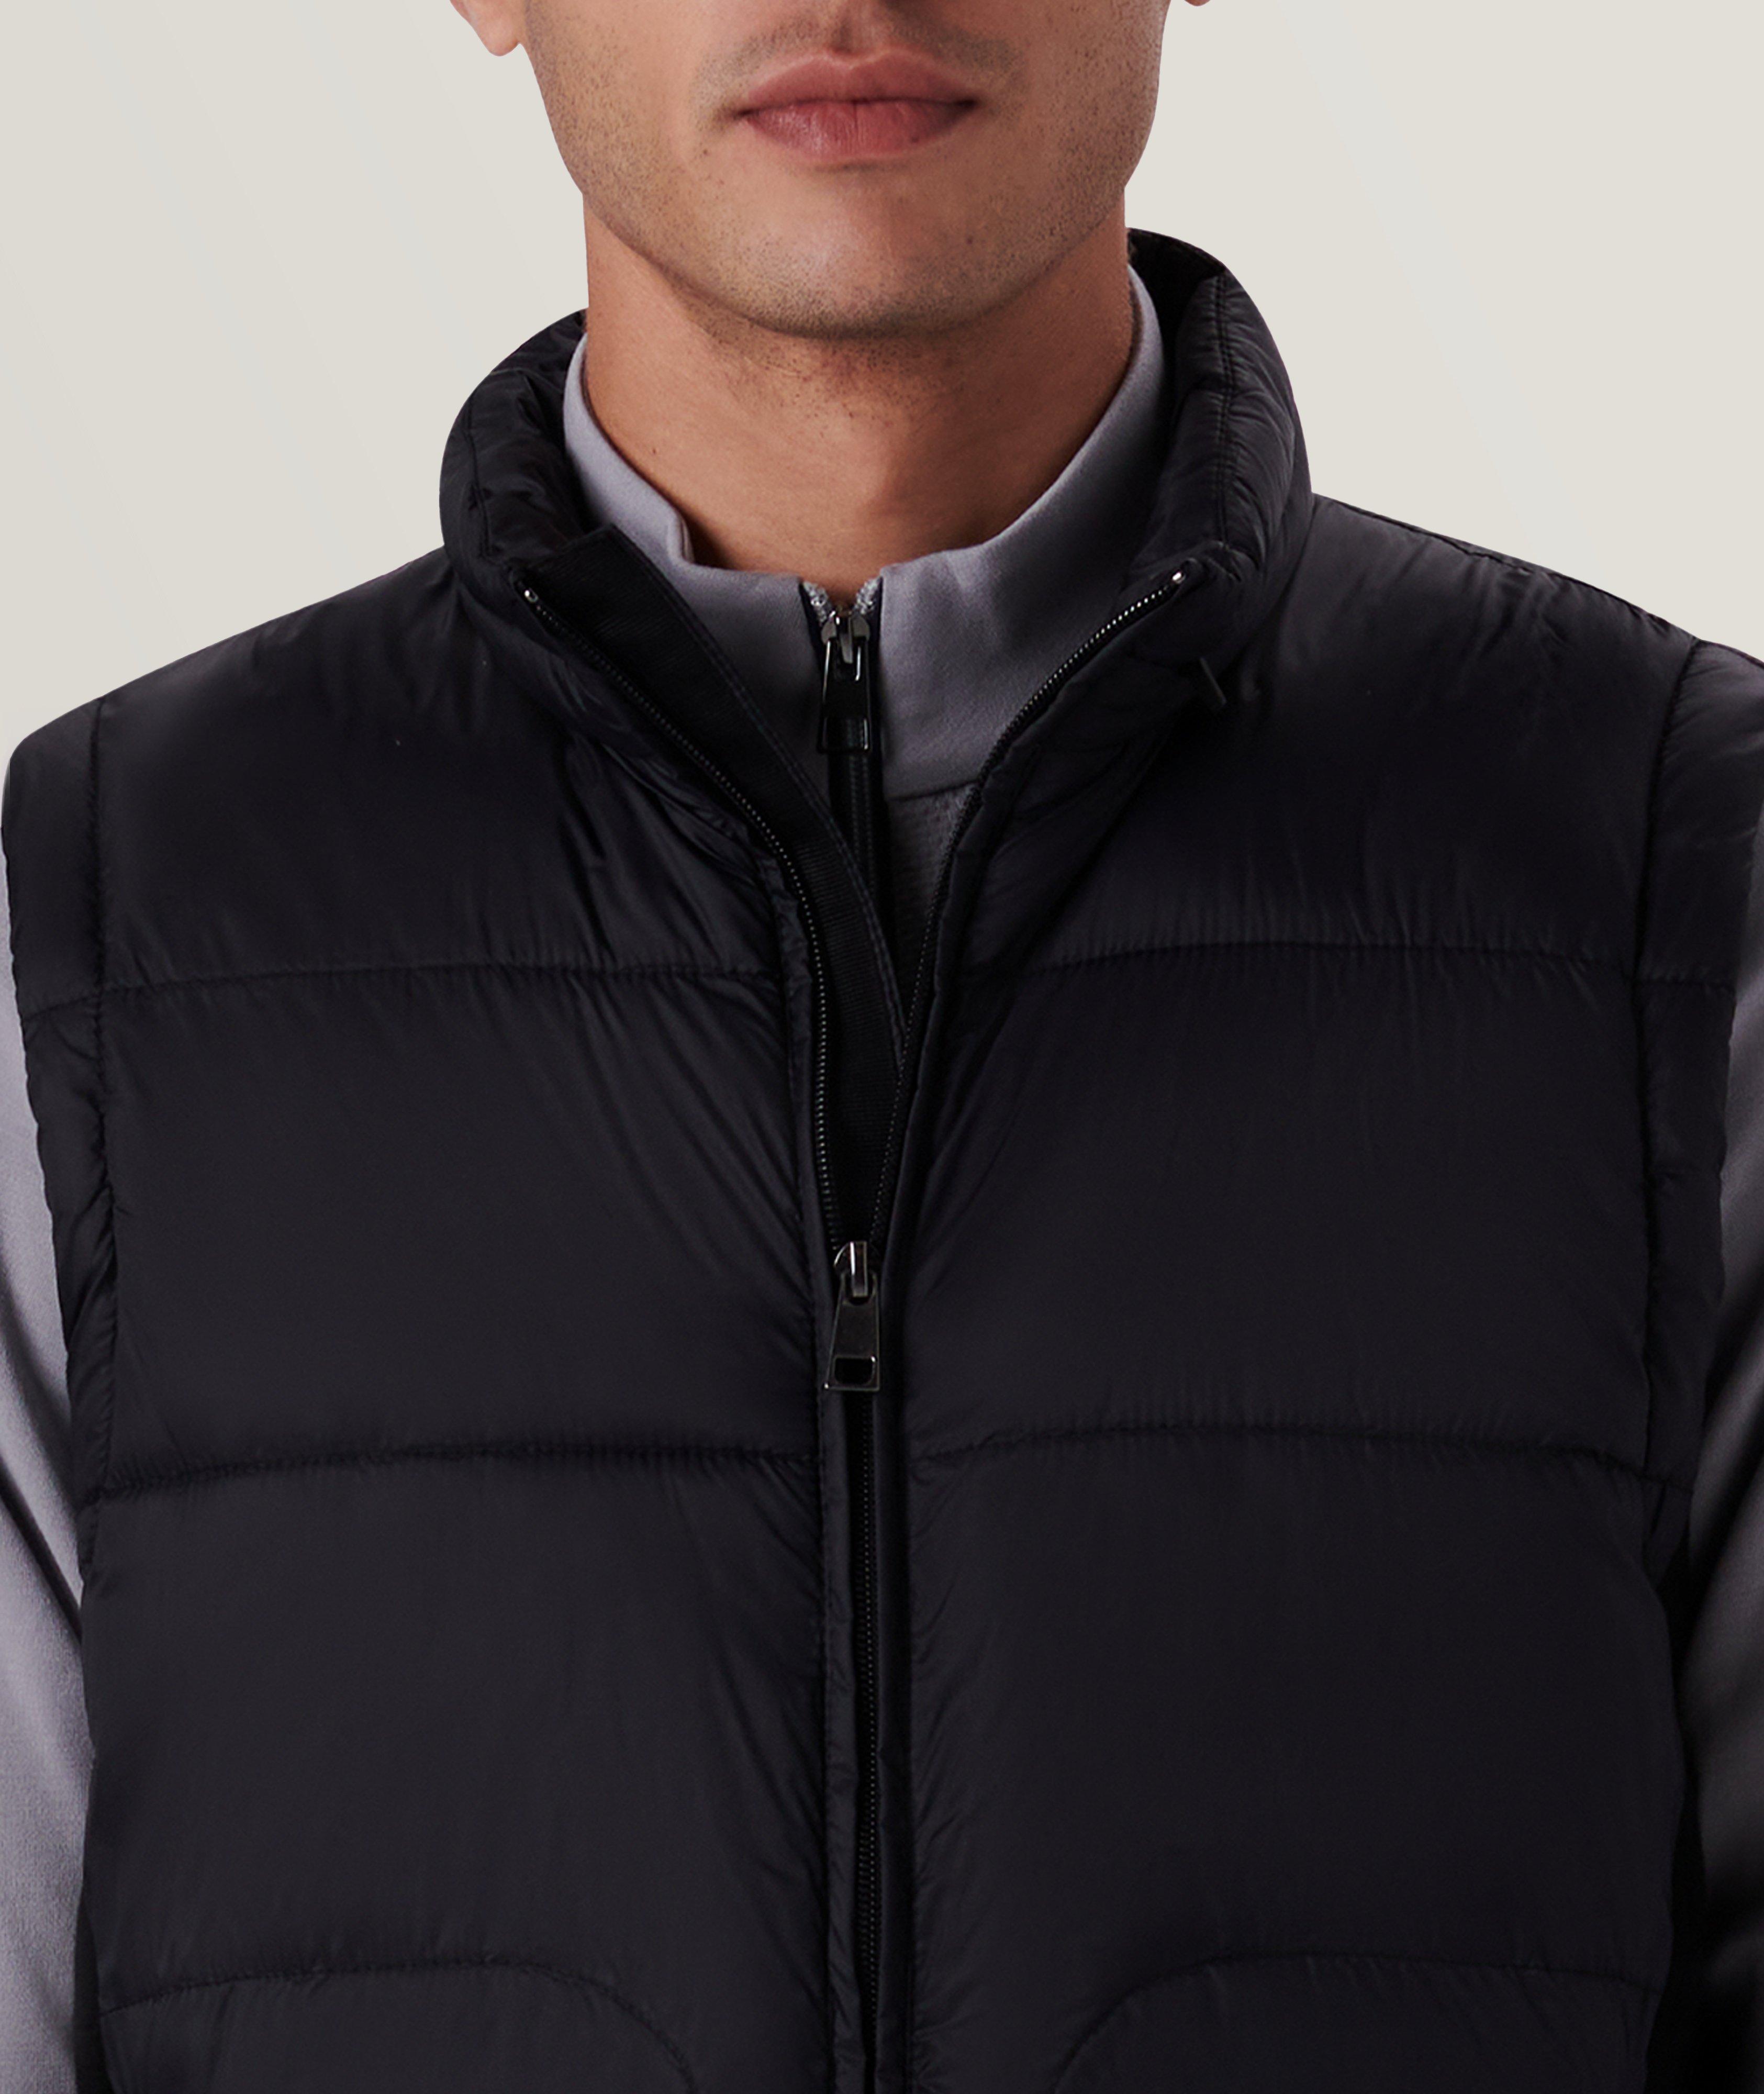 Quilted Mixed Material Nylon Vest image 1